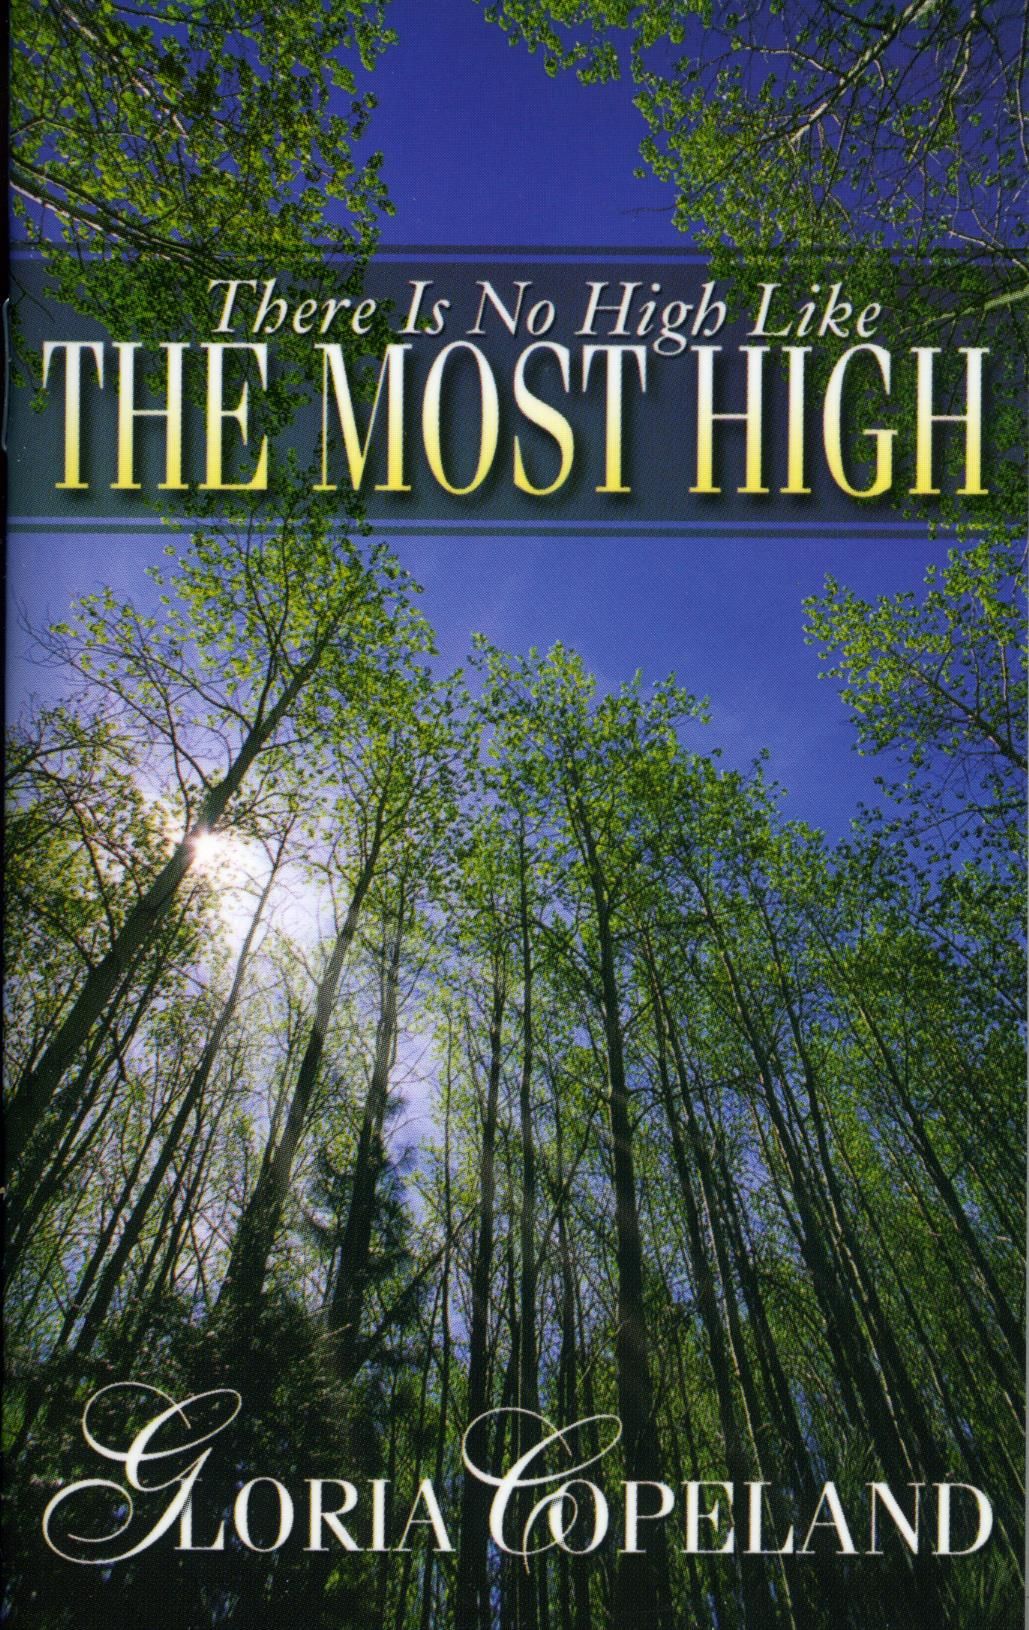 G. Copeland: There Is No High Like the Most High